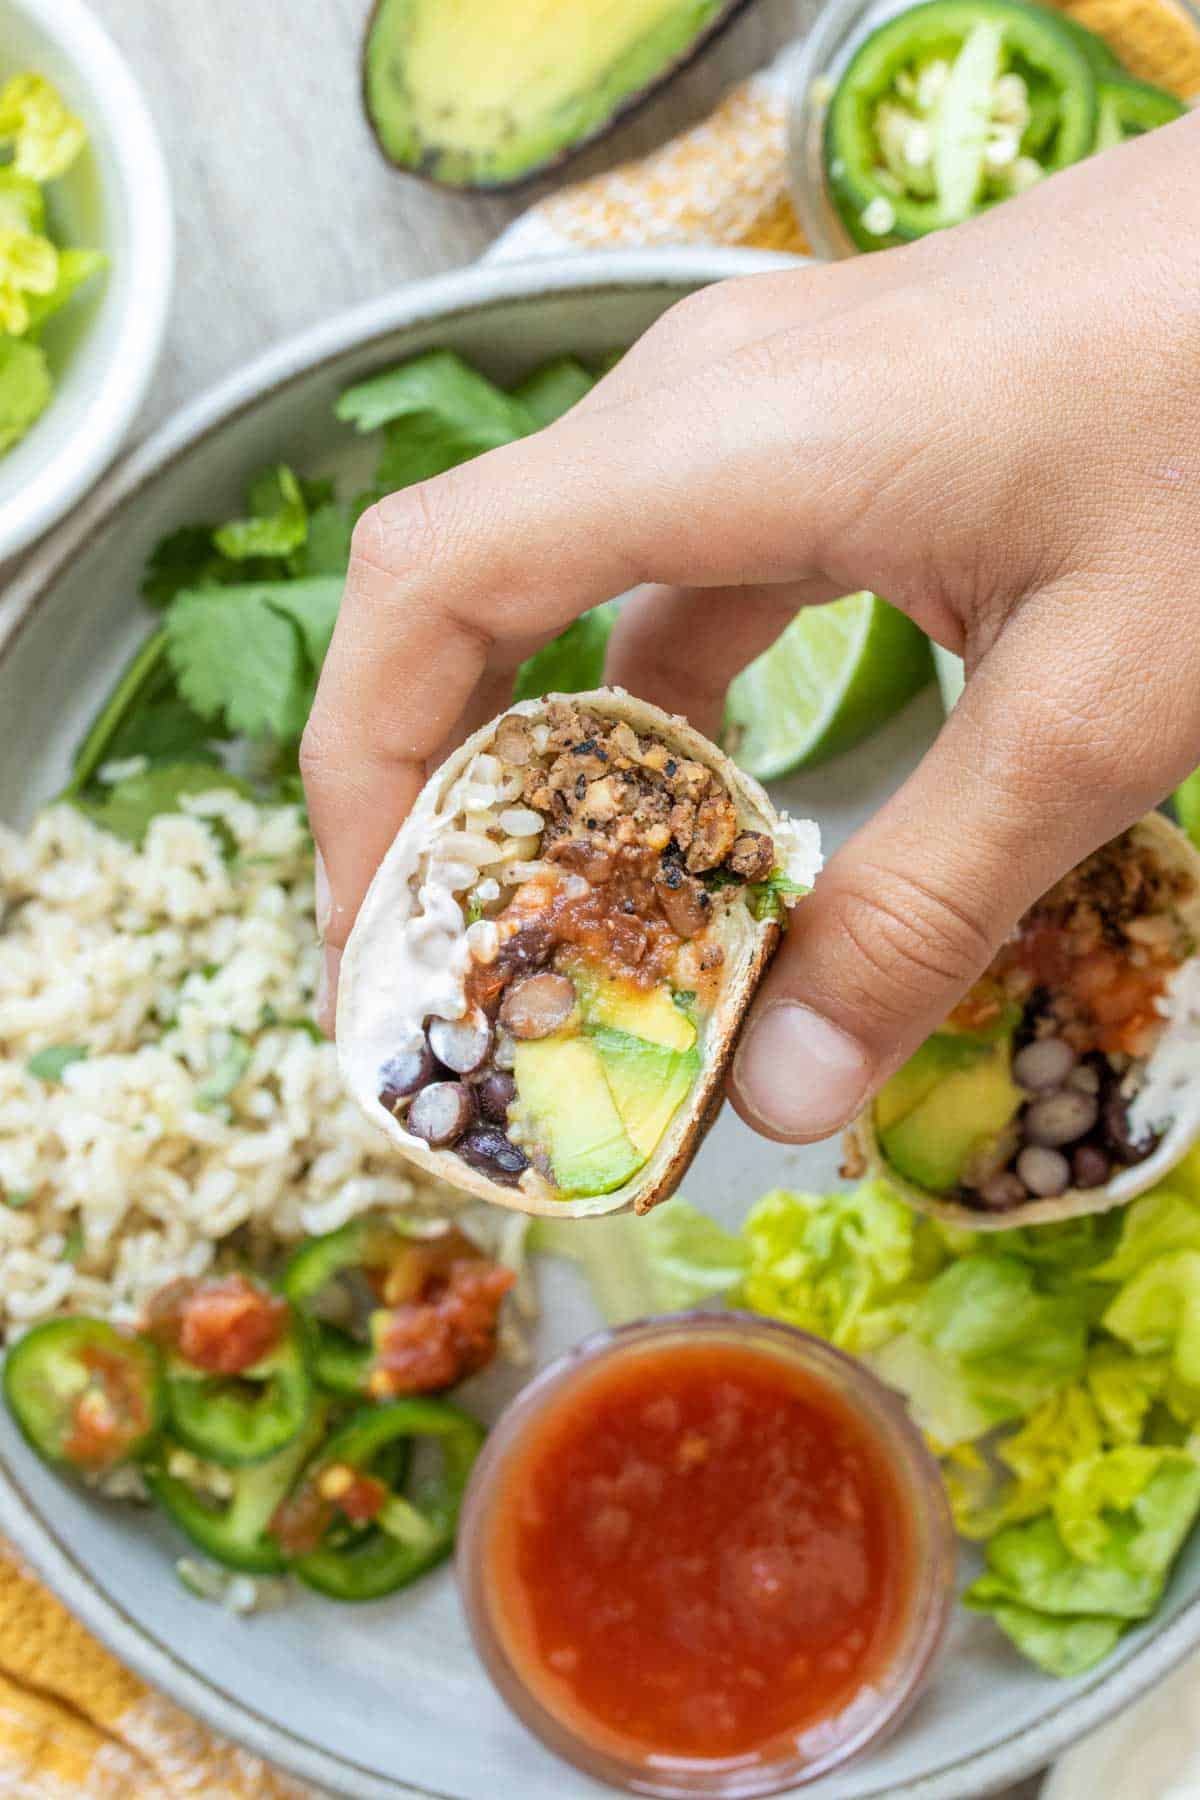 Hand holding a filled burrito cut in half over a plate